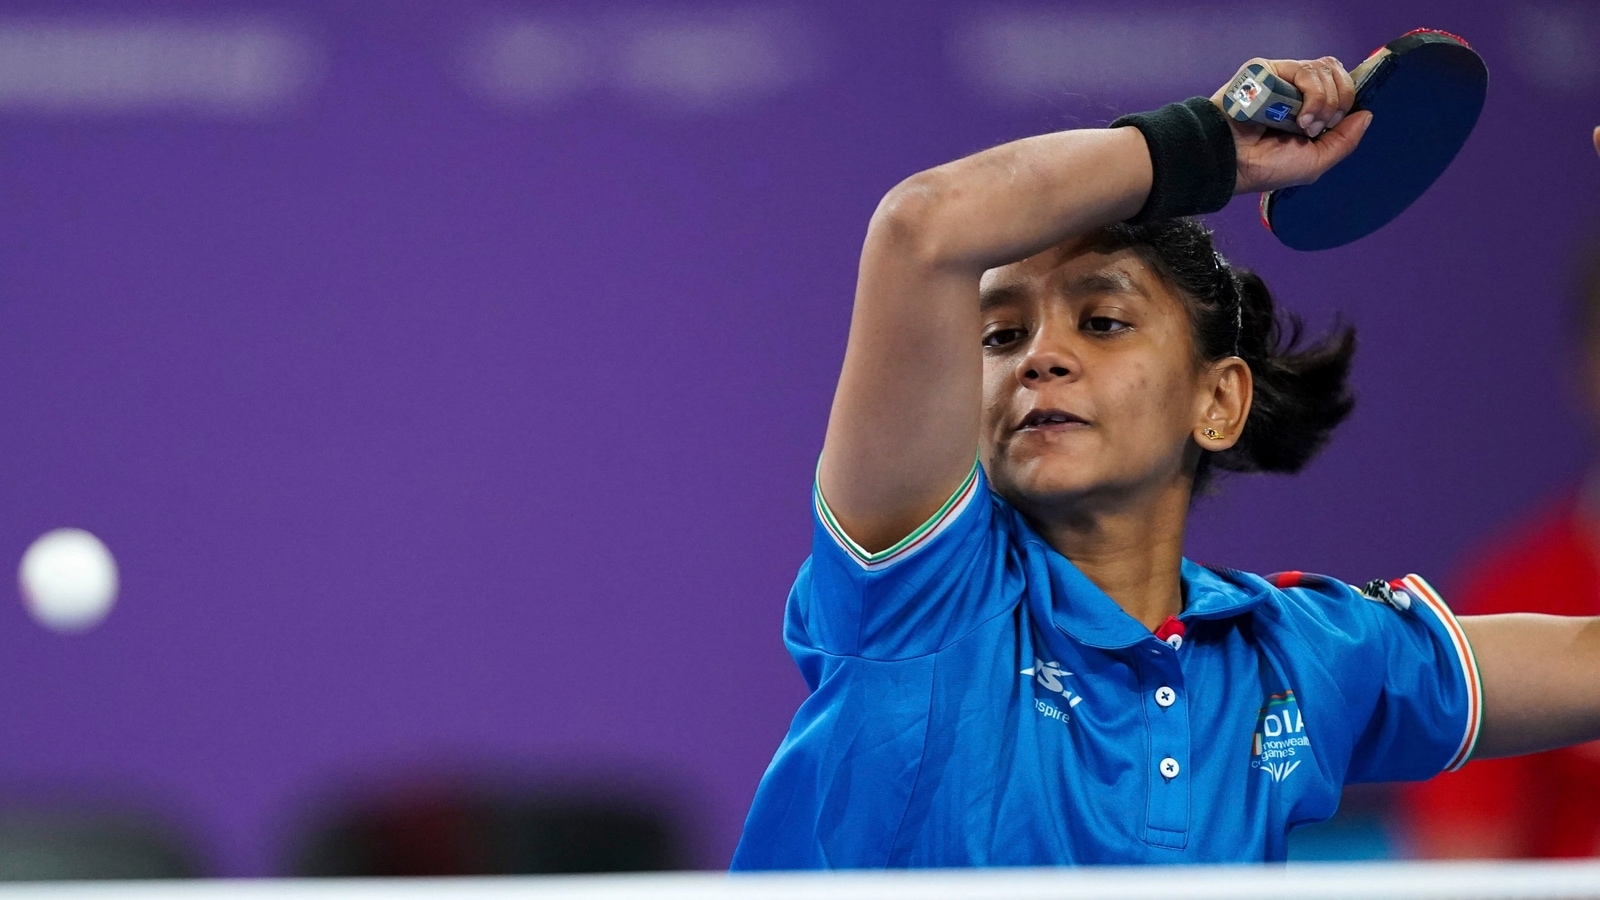 table-tennis-star-sreeja-akula-deprived-of-prize-money-since-her-victories-in-april